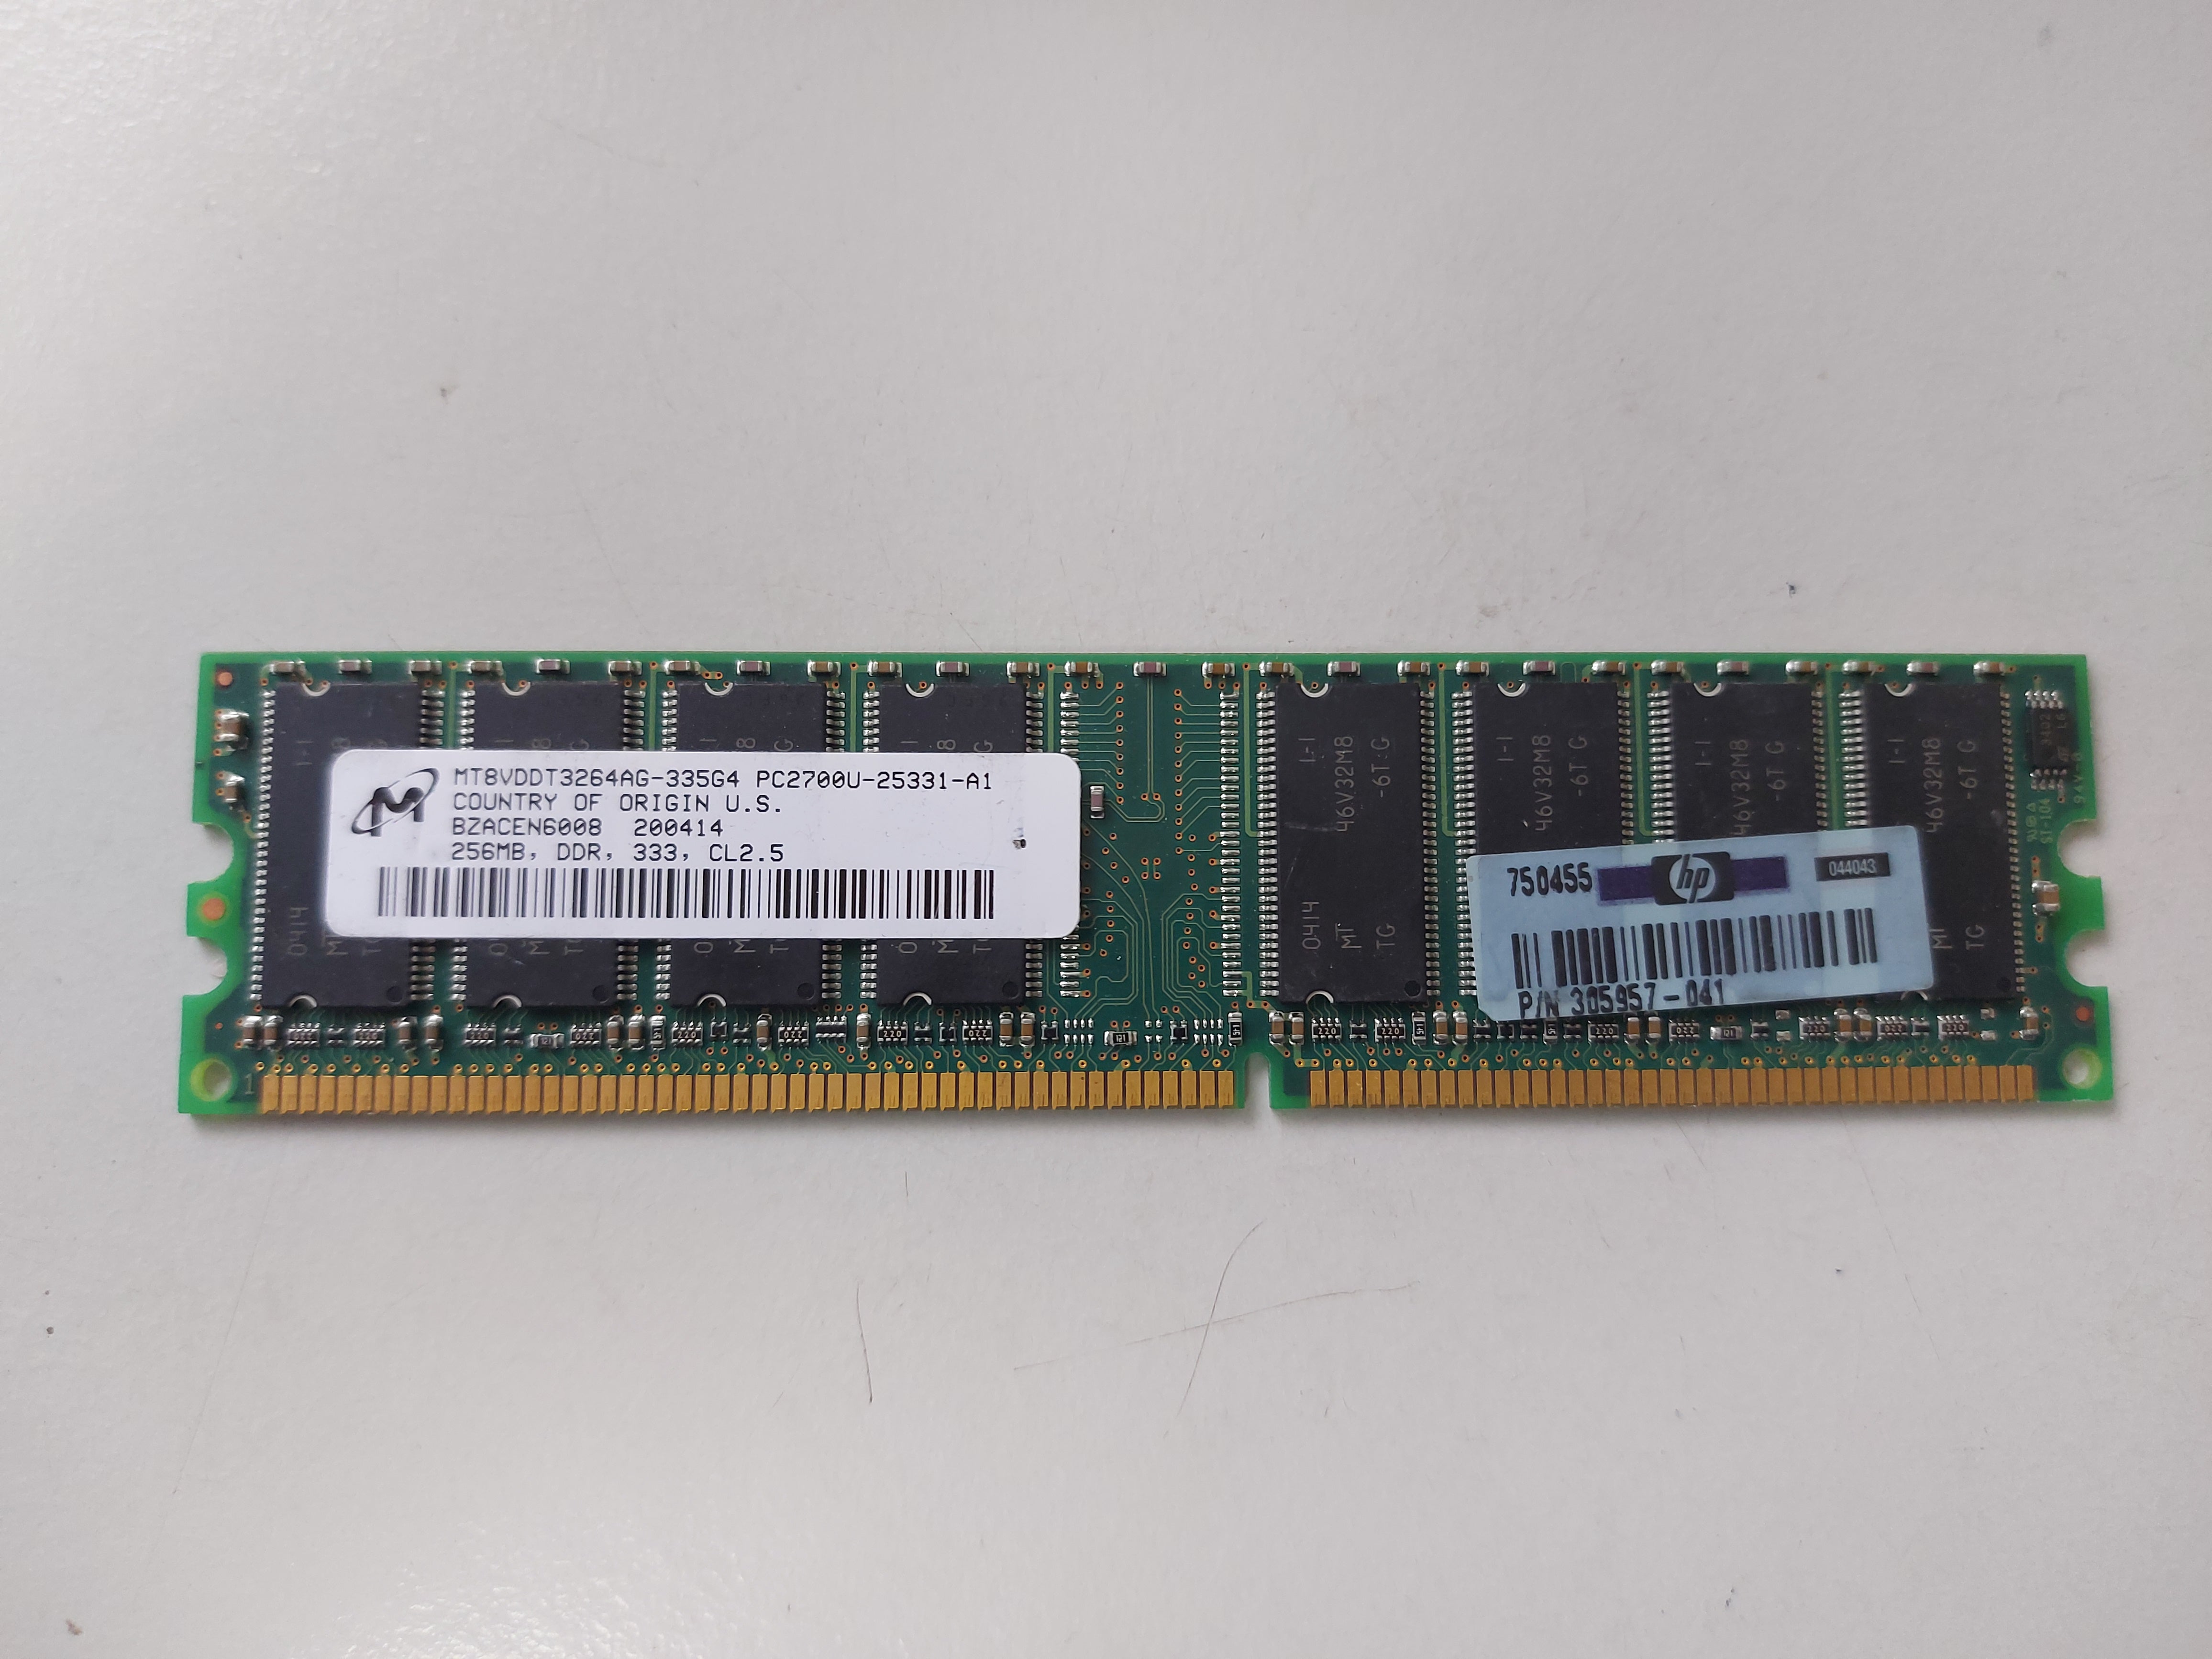 Micron HP 256MB PC2700 DDR-333MHz non-ECC Unbuffered CL2.5 184-Pin DIMM ( MT8VDDT3264AG-335G4 305957-041 ) REF